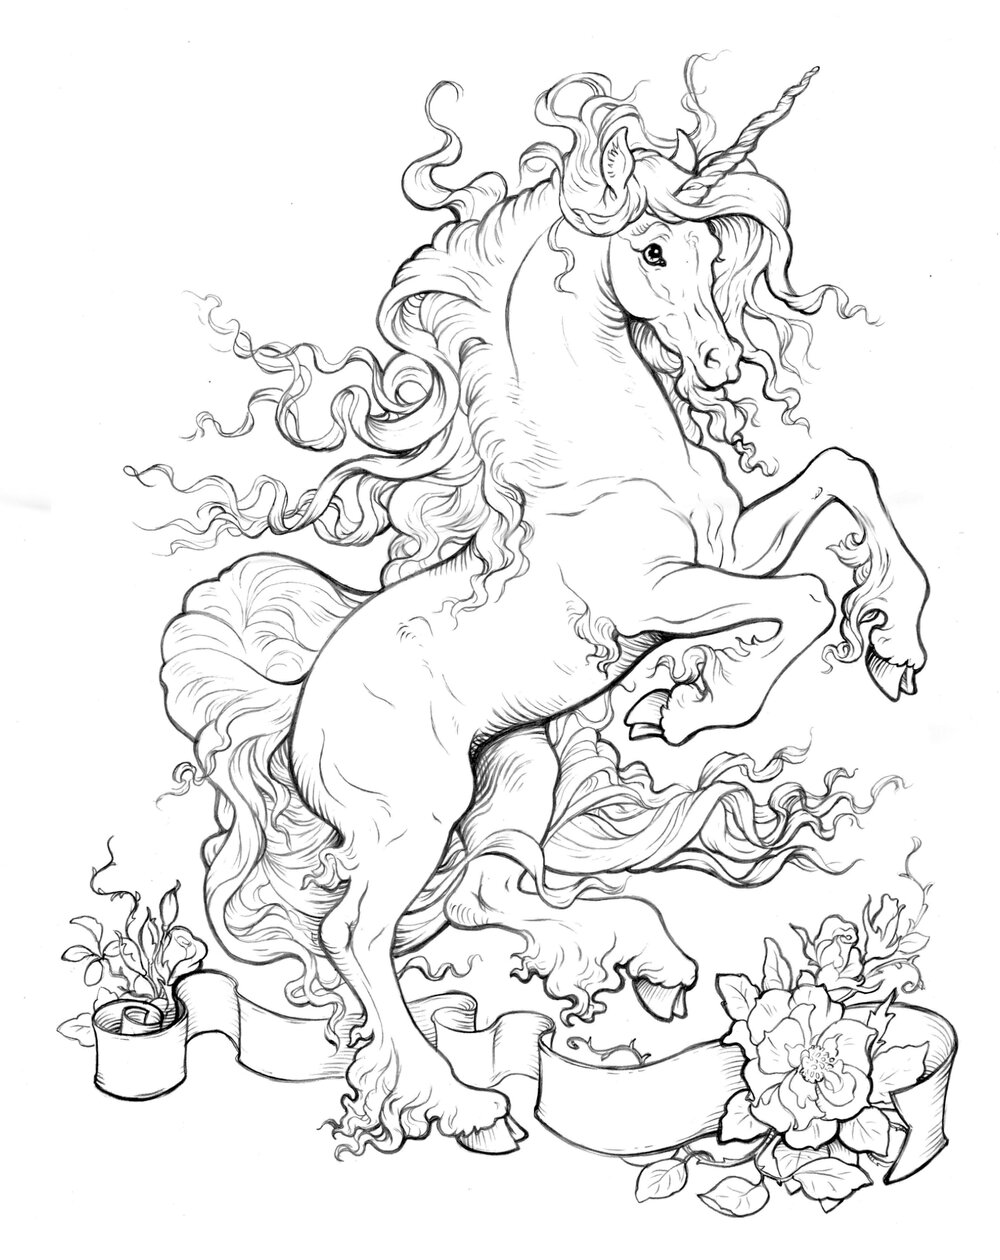 Digital coloring pages â art of kelly sparks